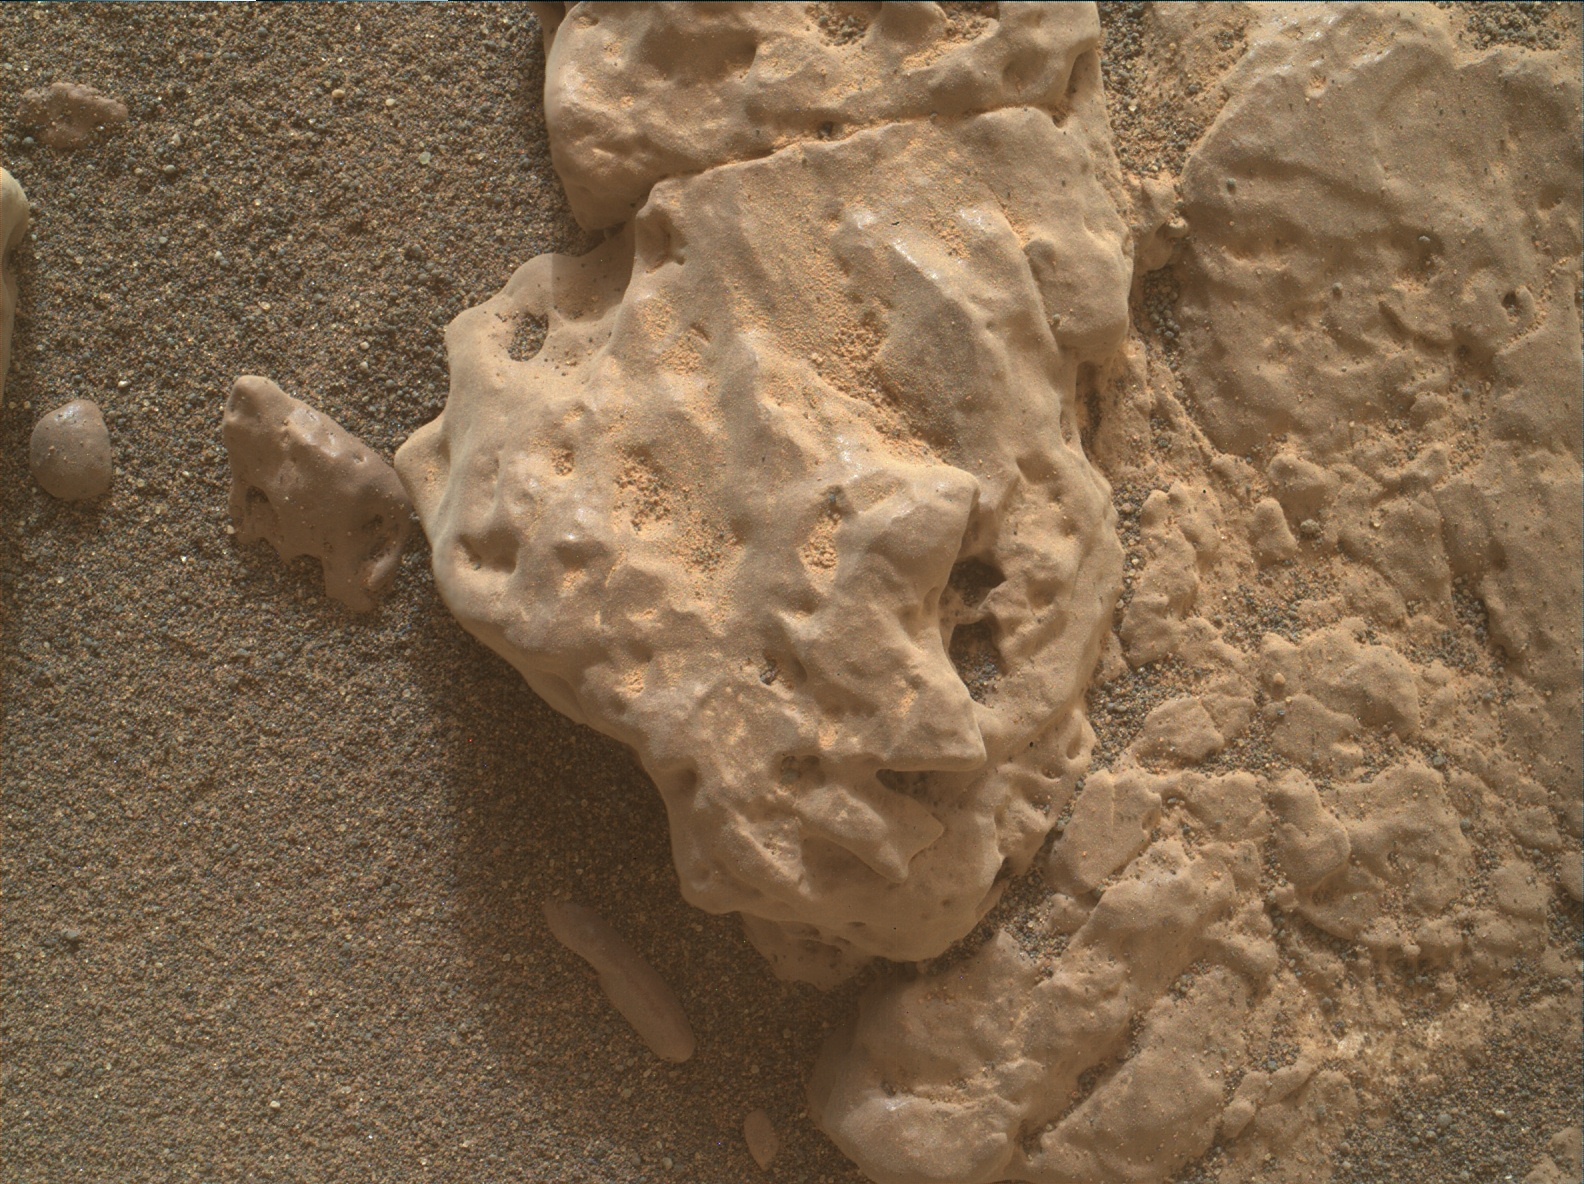 Nasa's Mars rover Curiosity acquired this image using its Mars Hand Lens Imager (MAHLI) on Sol 2316